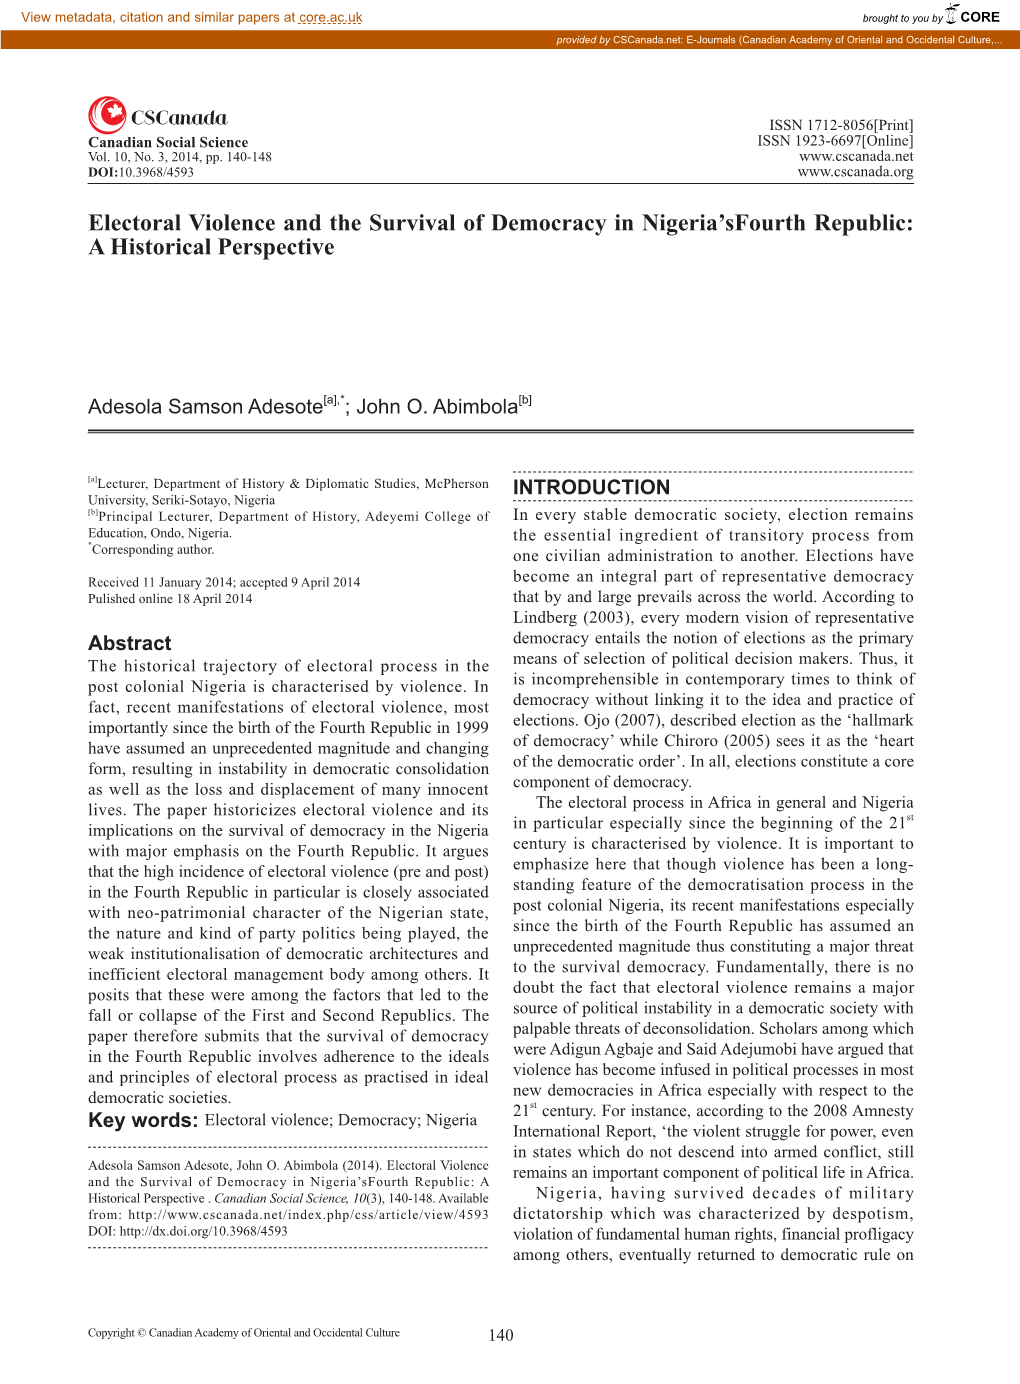 Electoral Violence and the Survival of Democracy in Nigeria’Sfourth Republic: a Historical Perspective